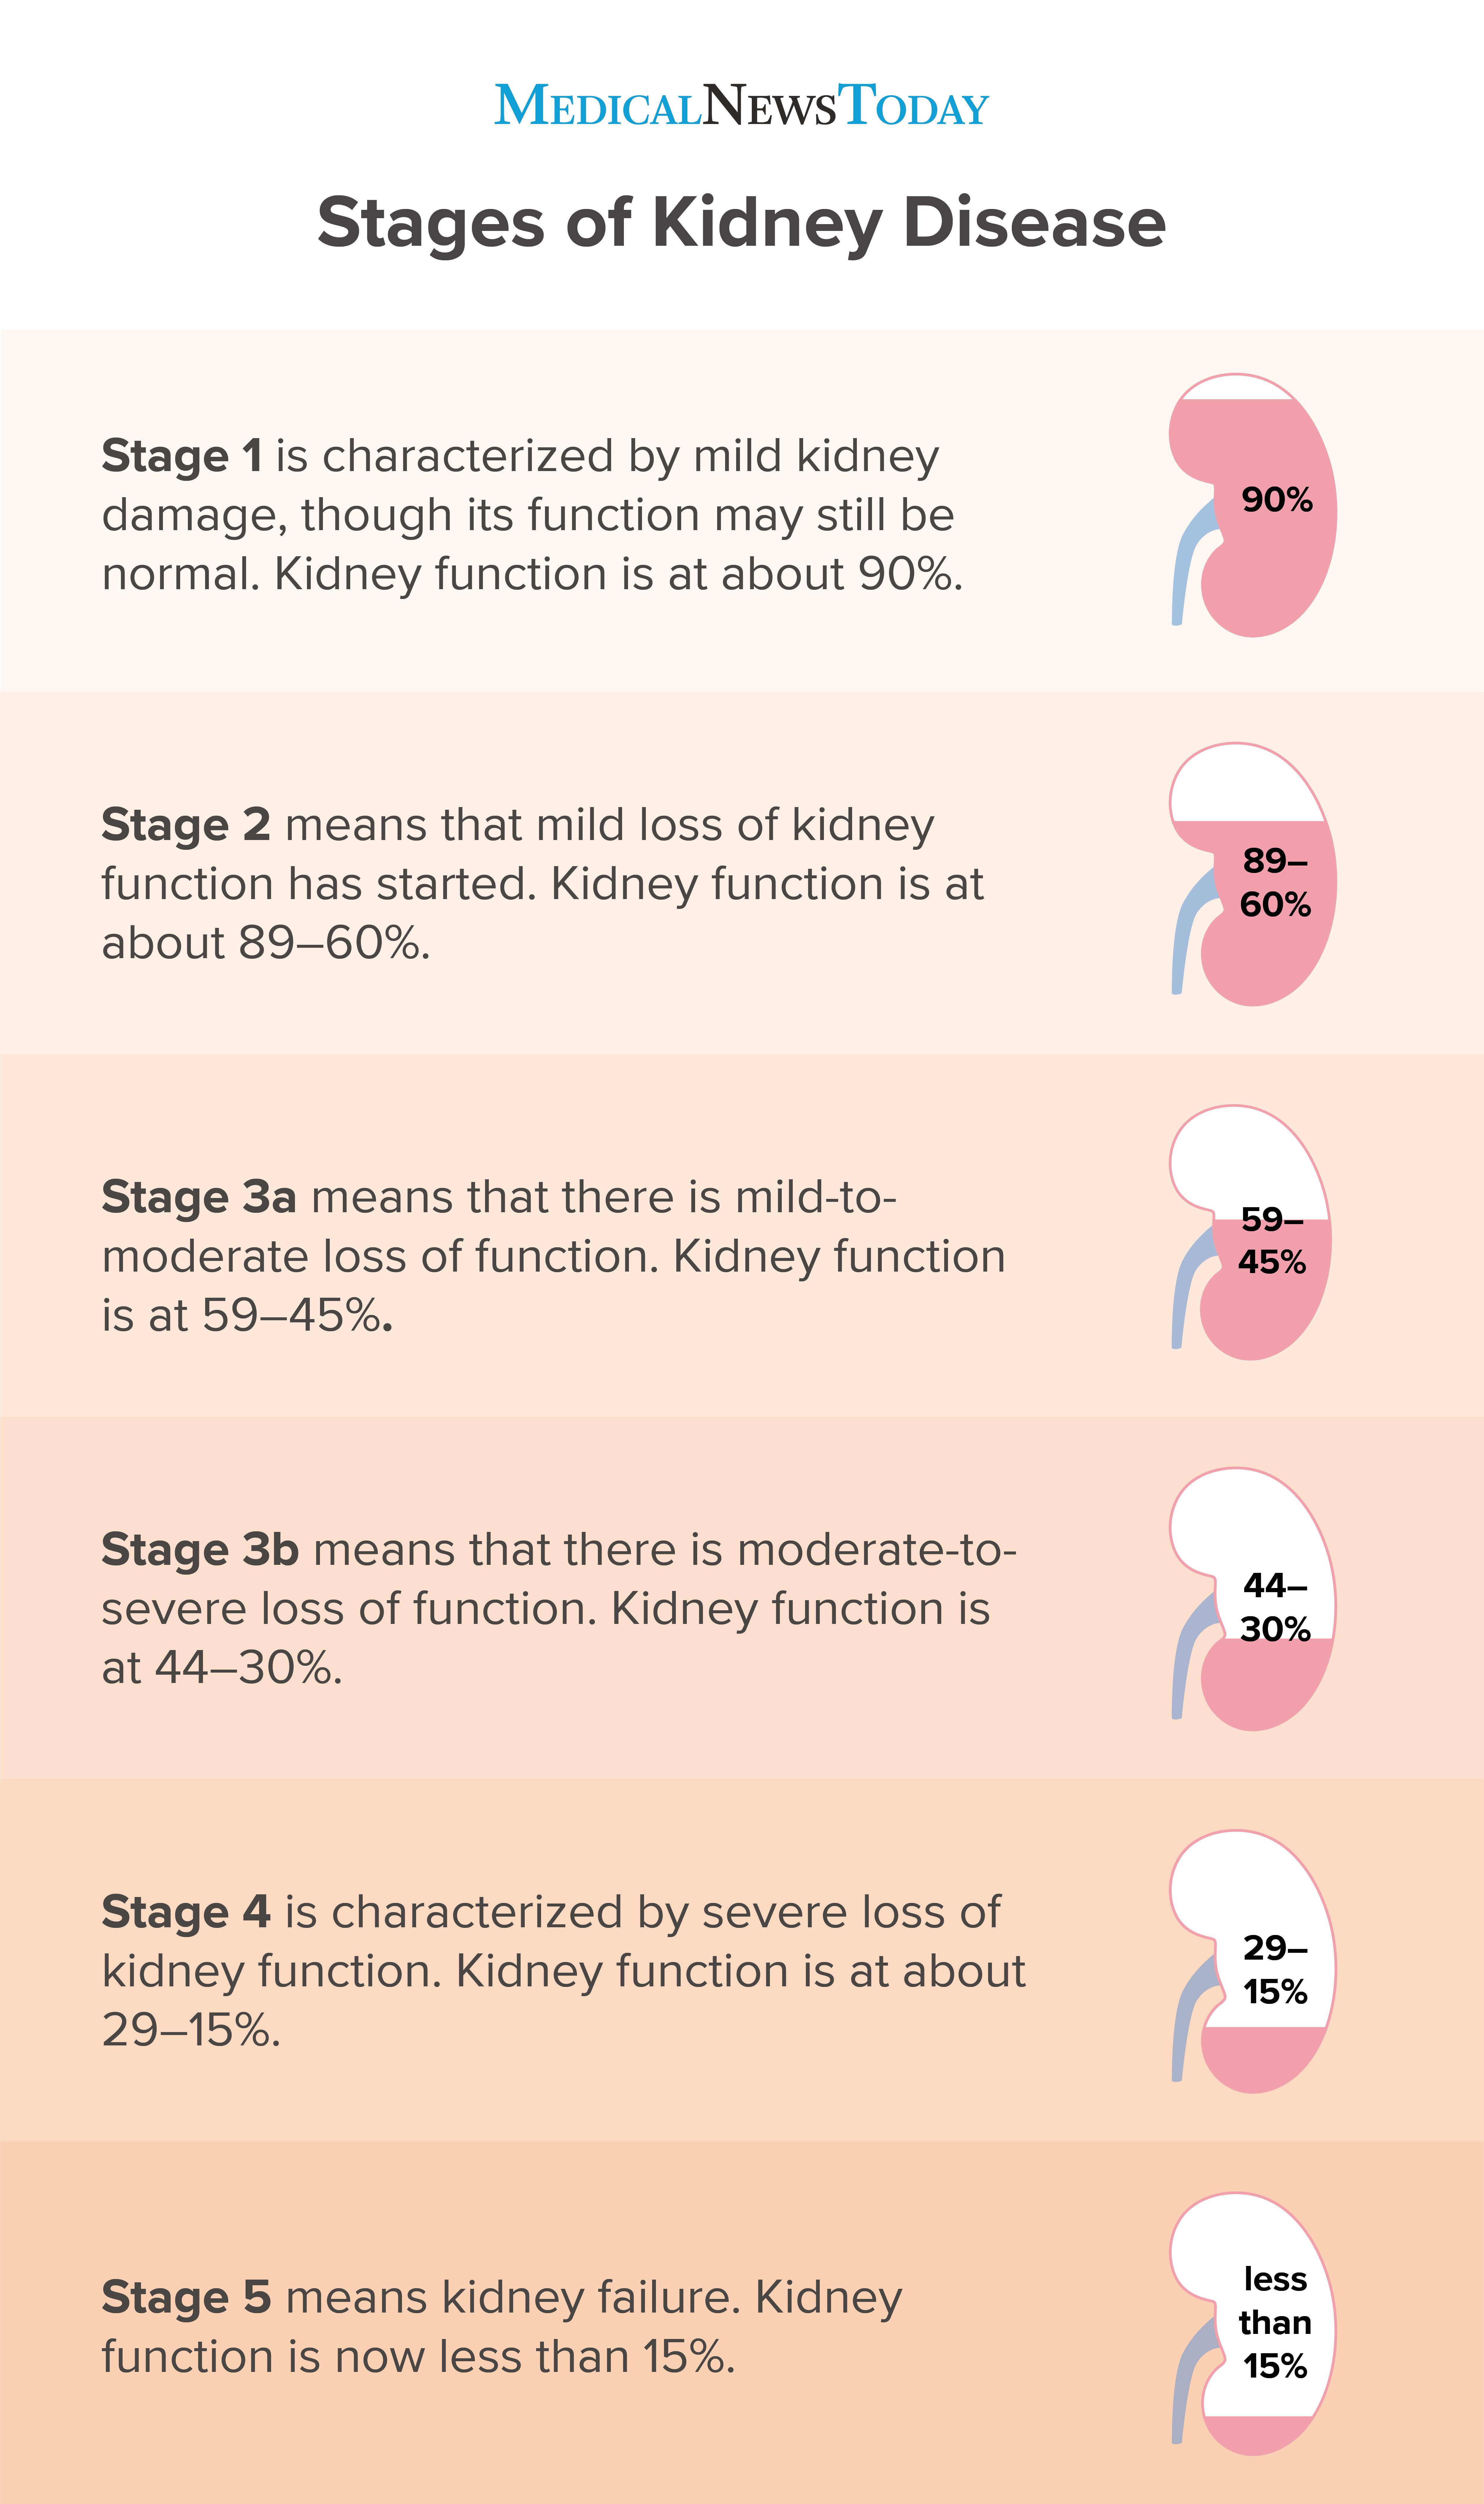 The what signs failure renal are of Acute kidney